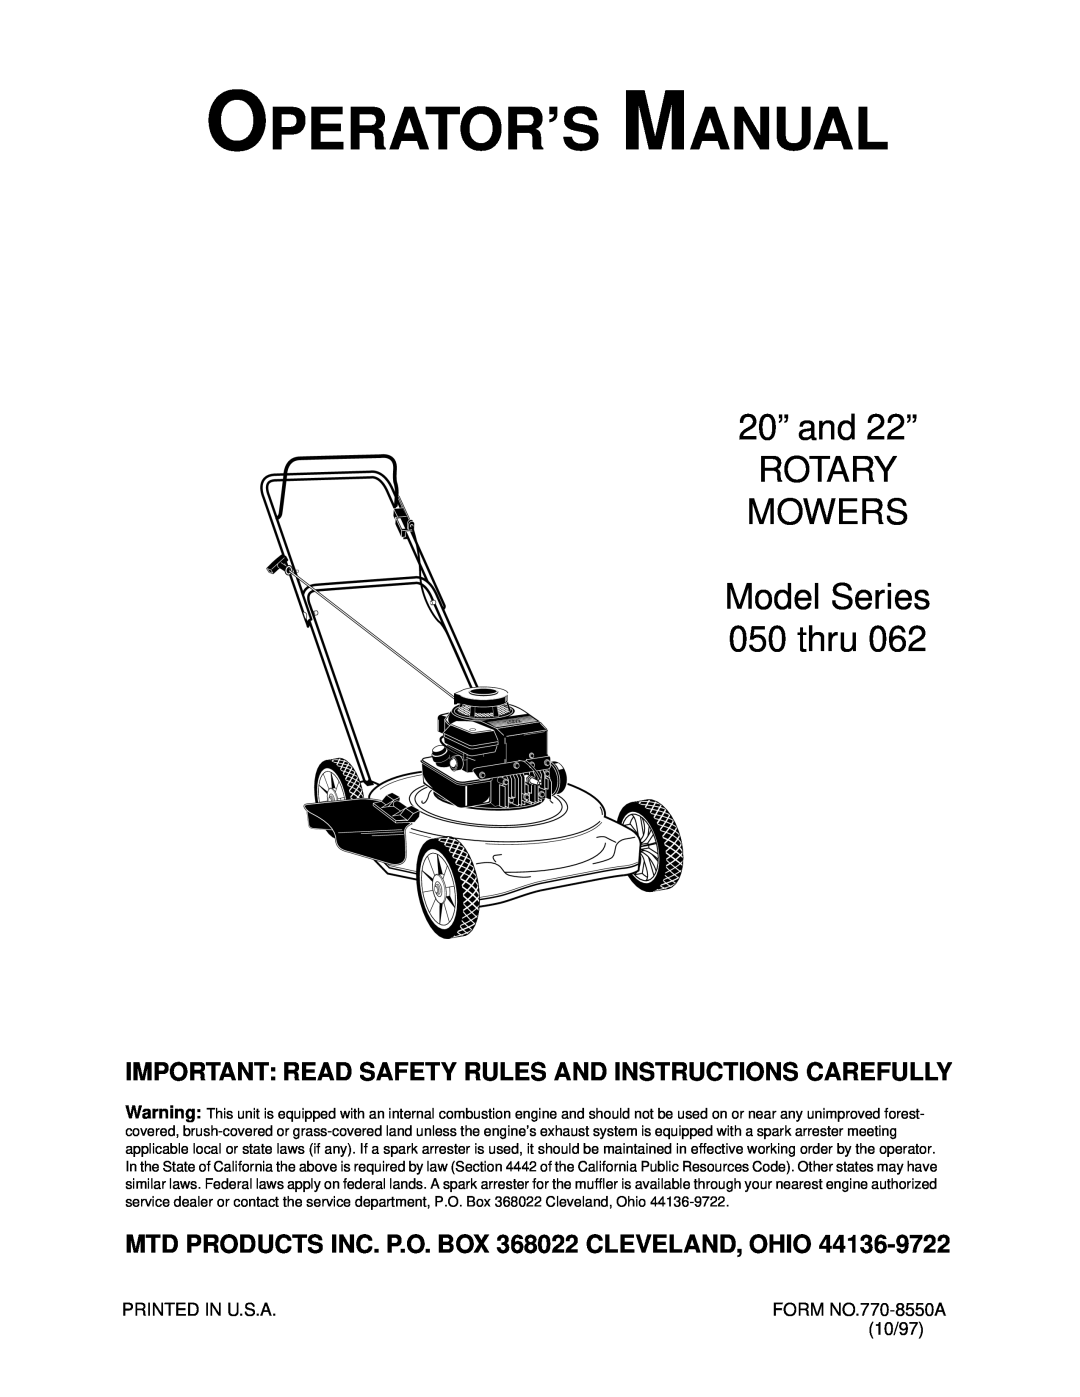 MTD 050 thru 062 manual Important Read Safety Rules And Instructions Carefully, Operator’S Manual 